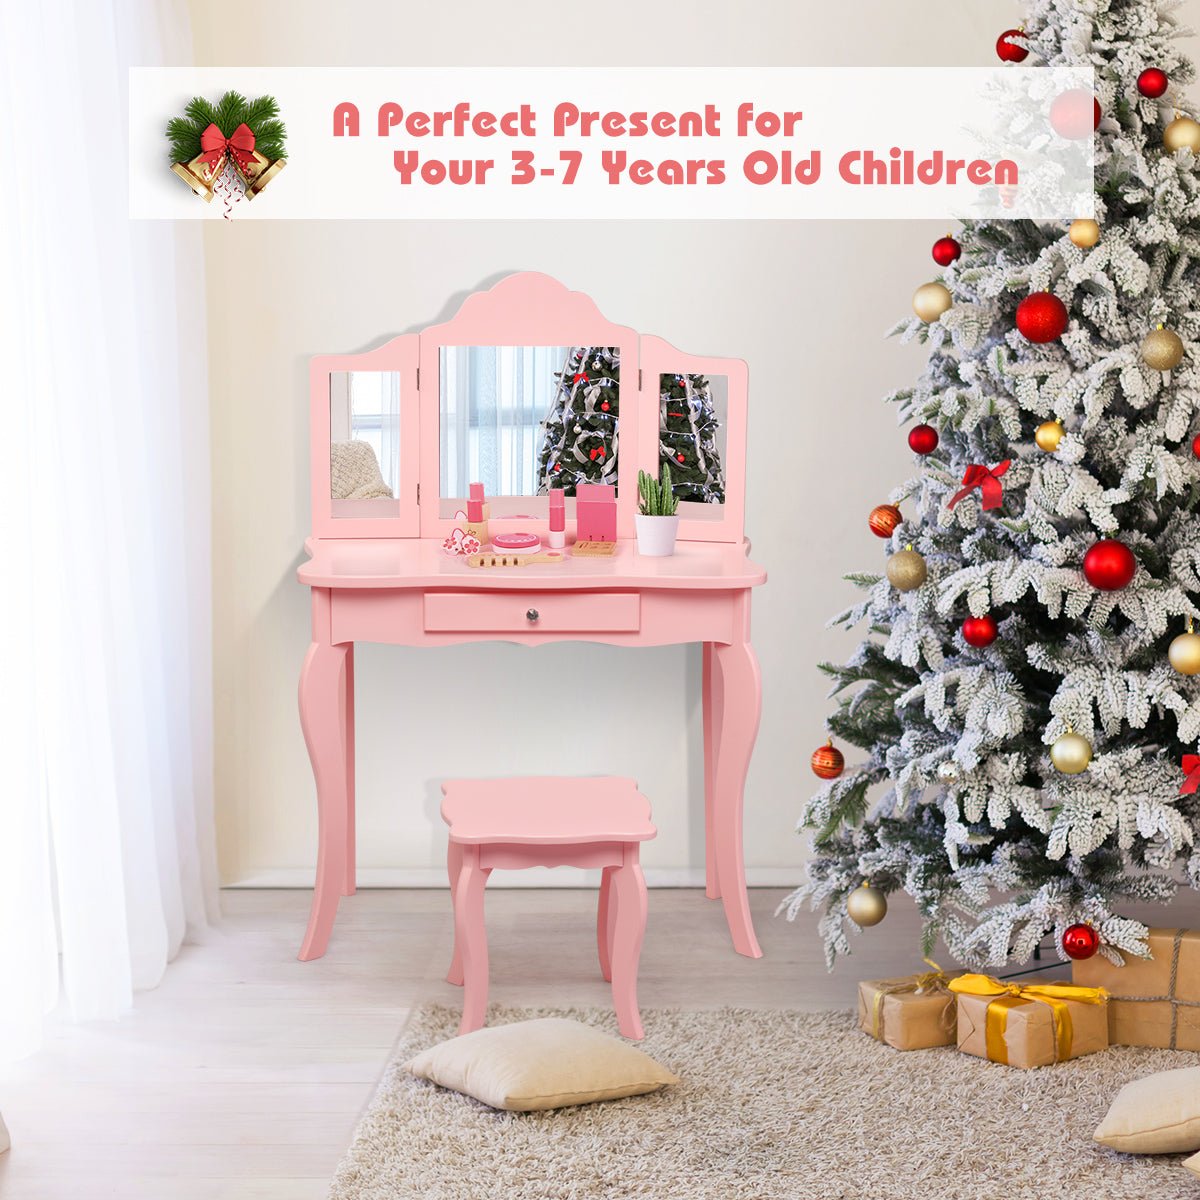 Children's Vanity Table & Mirror - Magical Space for Ages 3-7